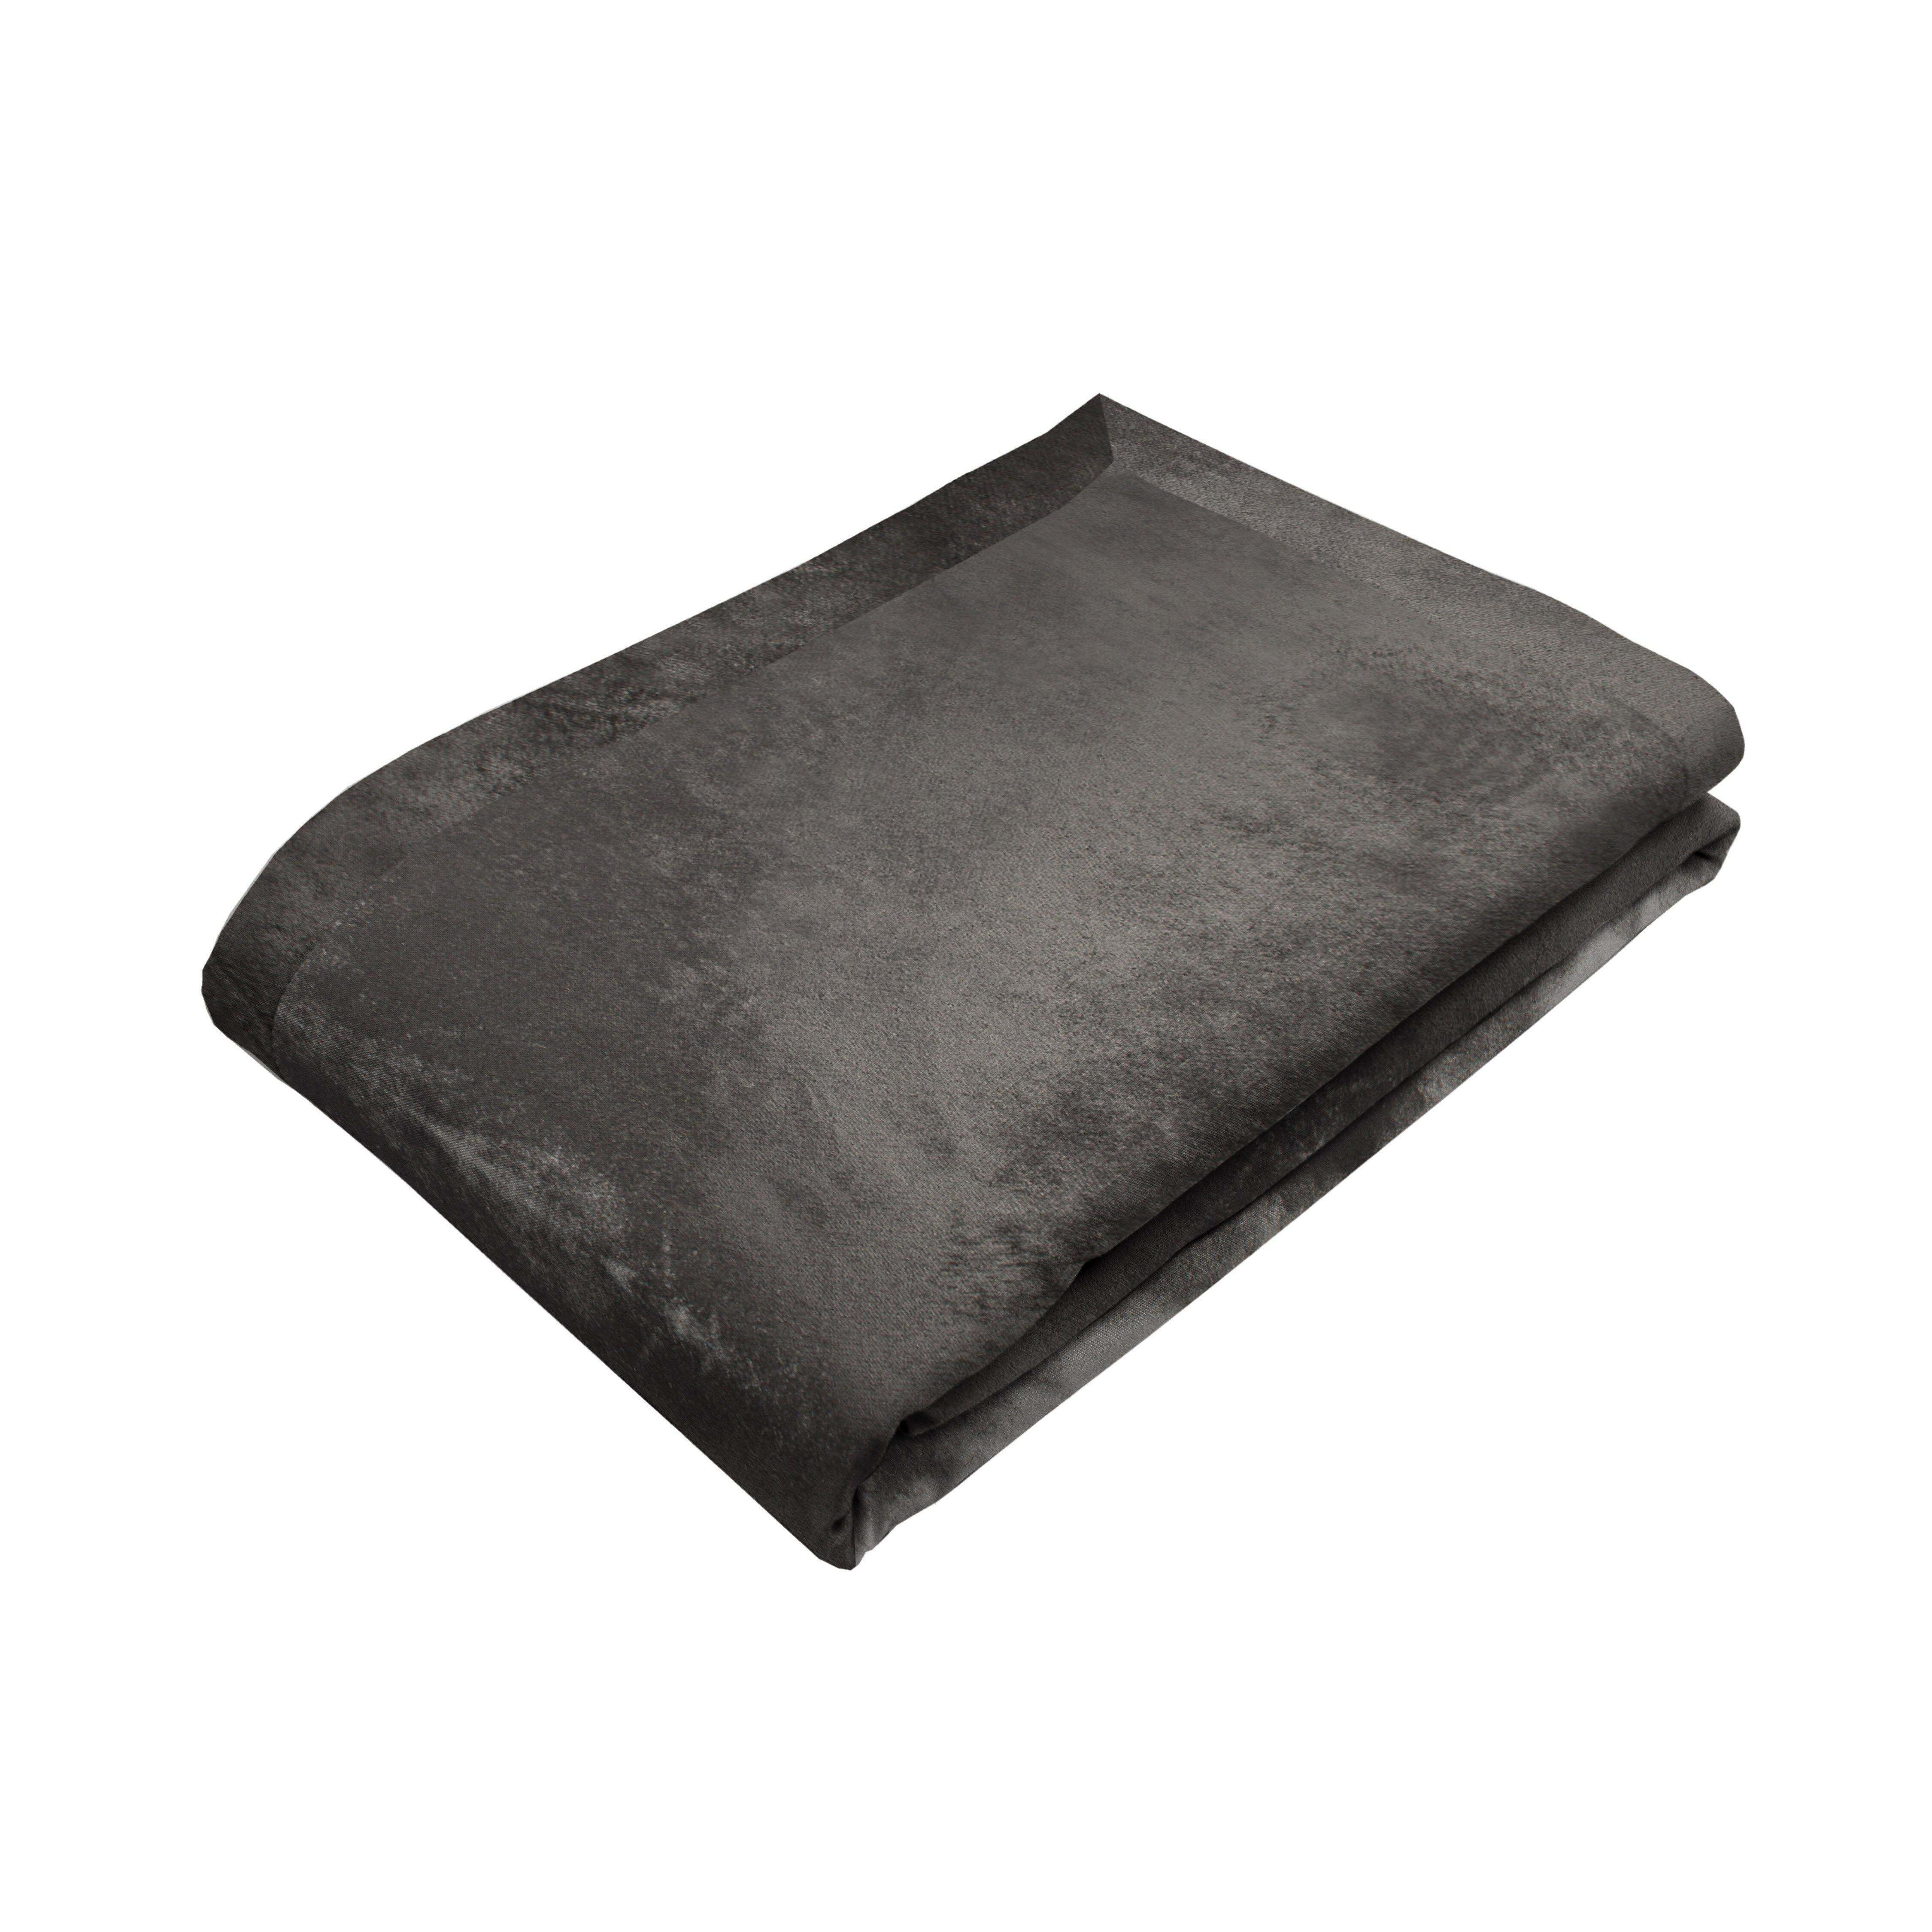 Charcoal Grey Crushed Velvet Throws & Runners, XX-Large (265cm x 380cm)